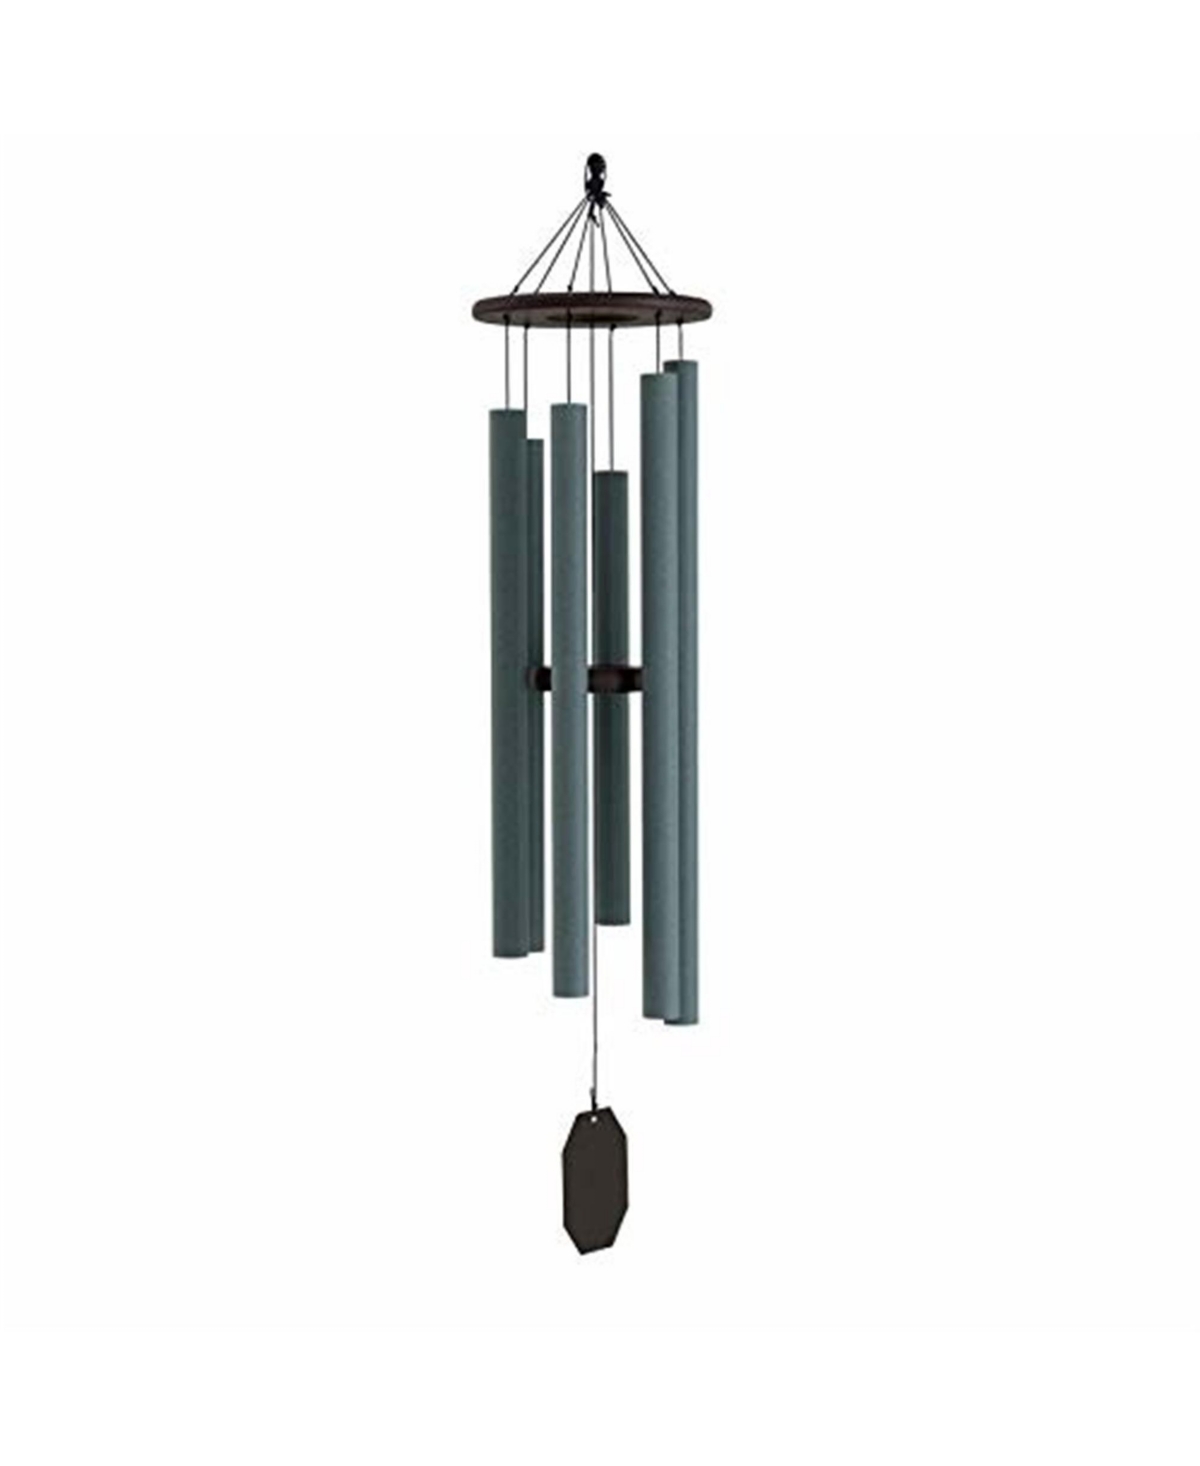 15510302 Lambright Chimes Serenity Wind Chime Amish Crafted sku 15510302